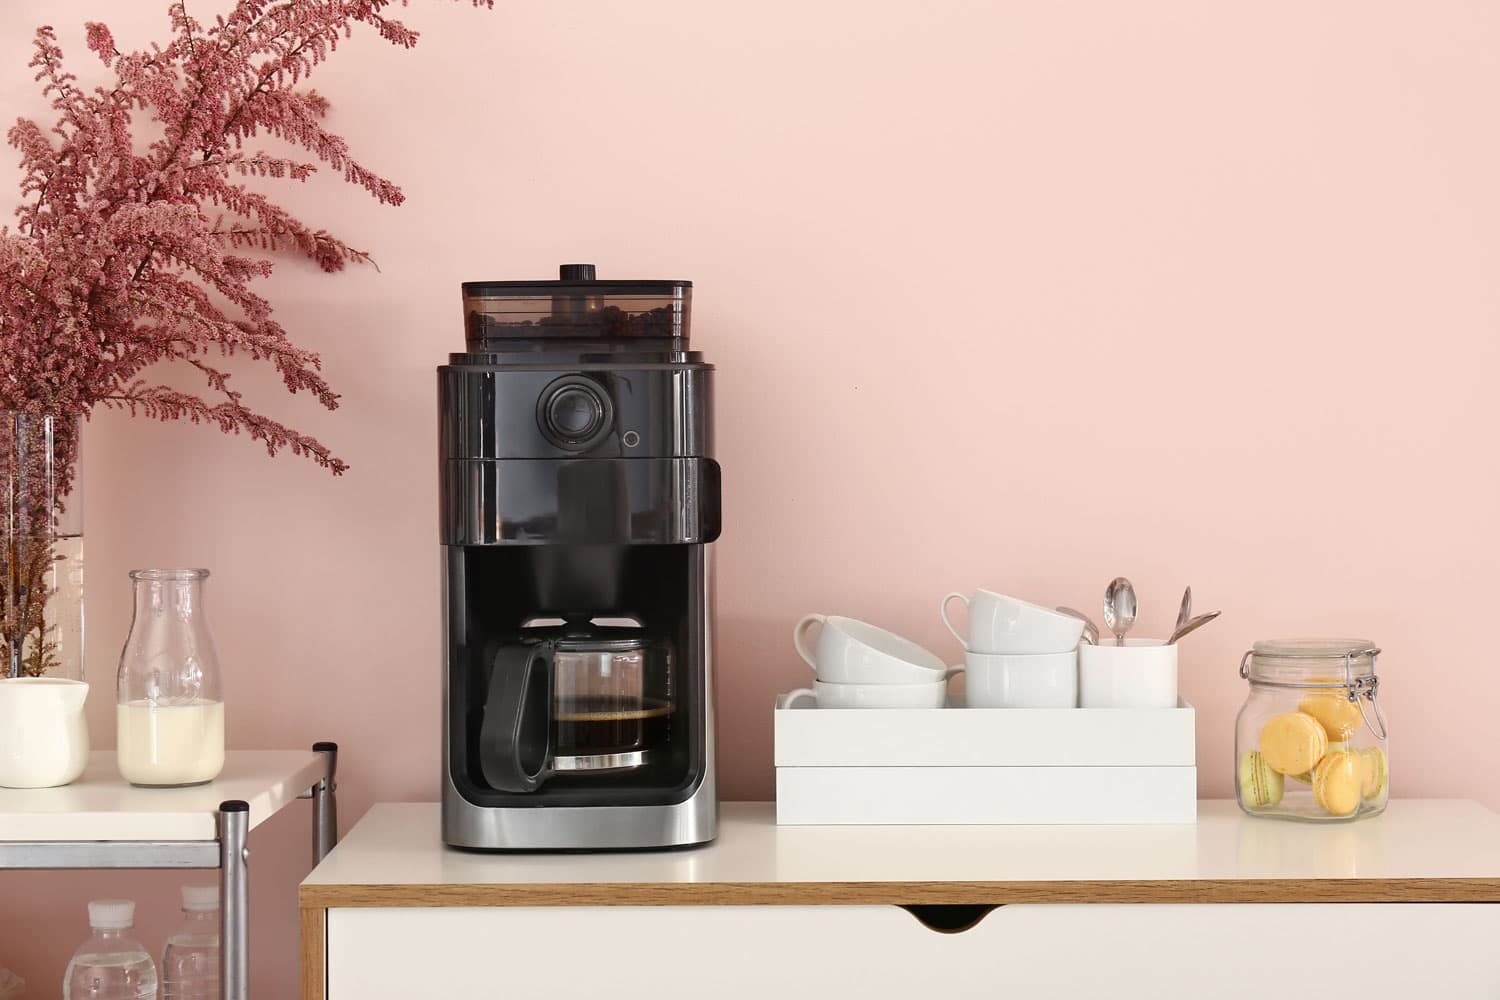 A coffee maker in the kitchen